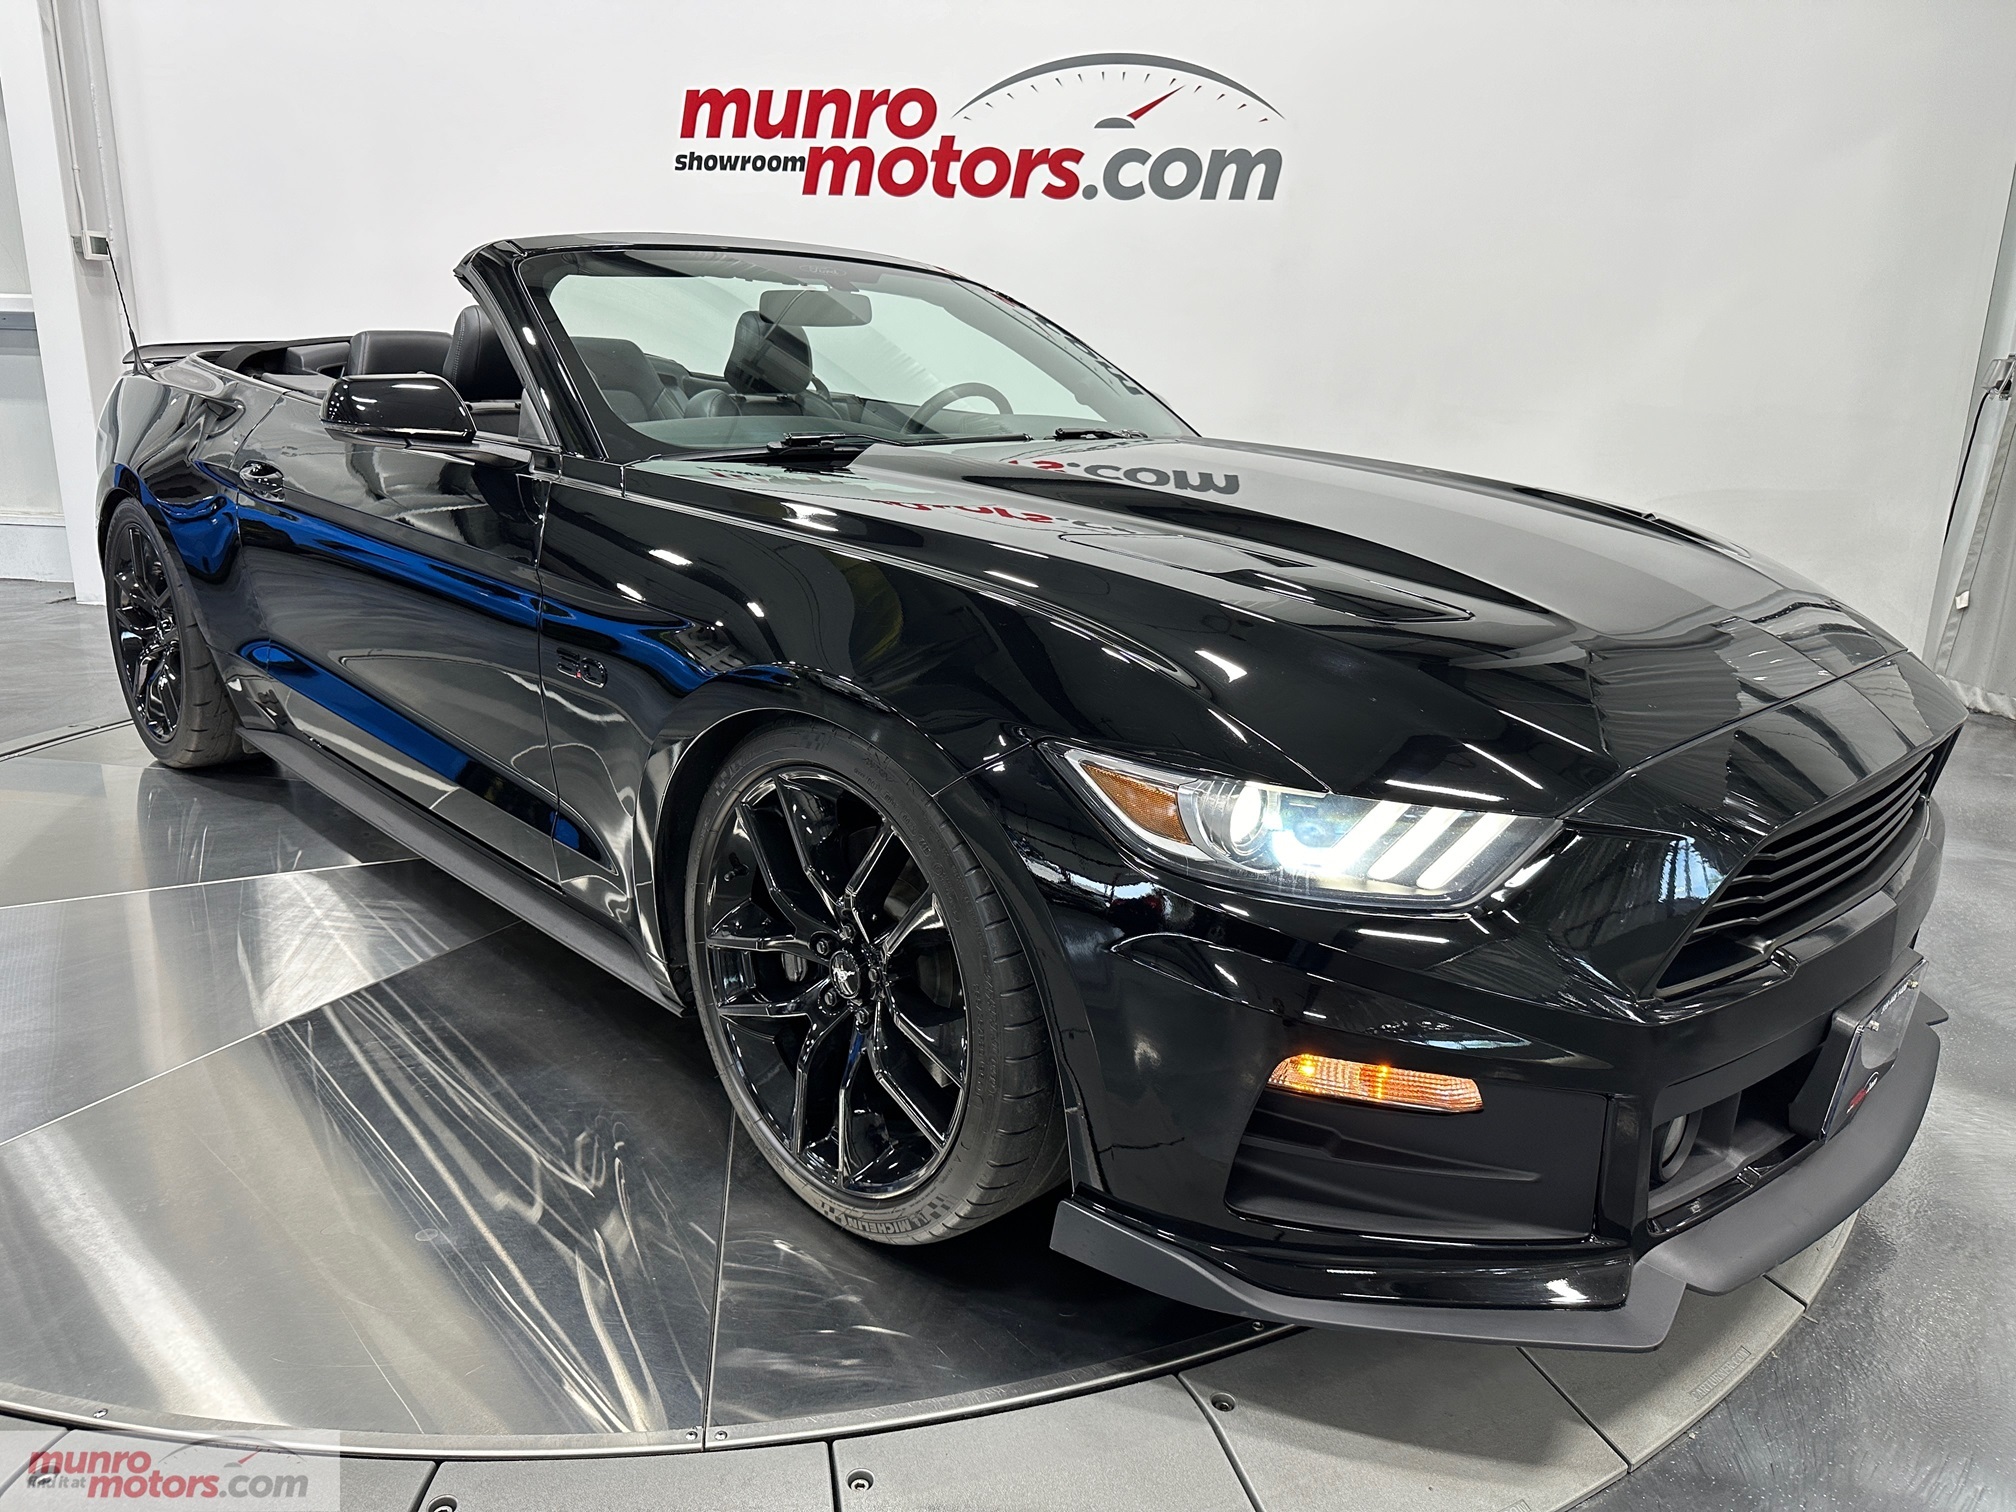 2015 Ford Mustang GT Premium Convertible Whipple Supercharger Manual